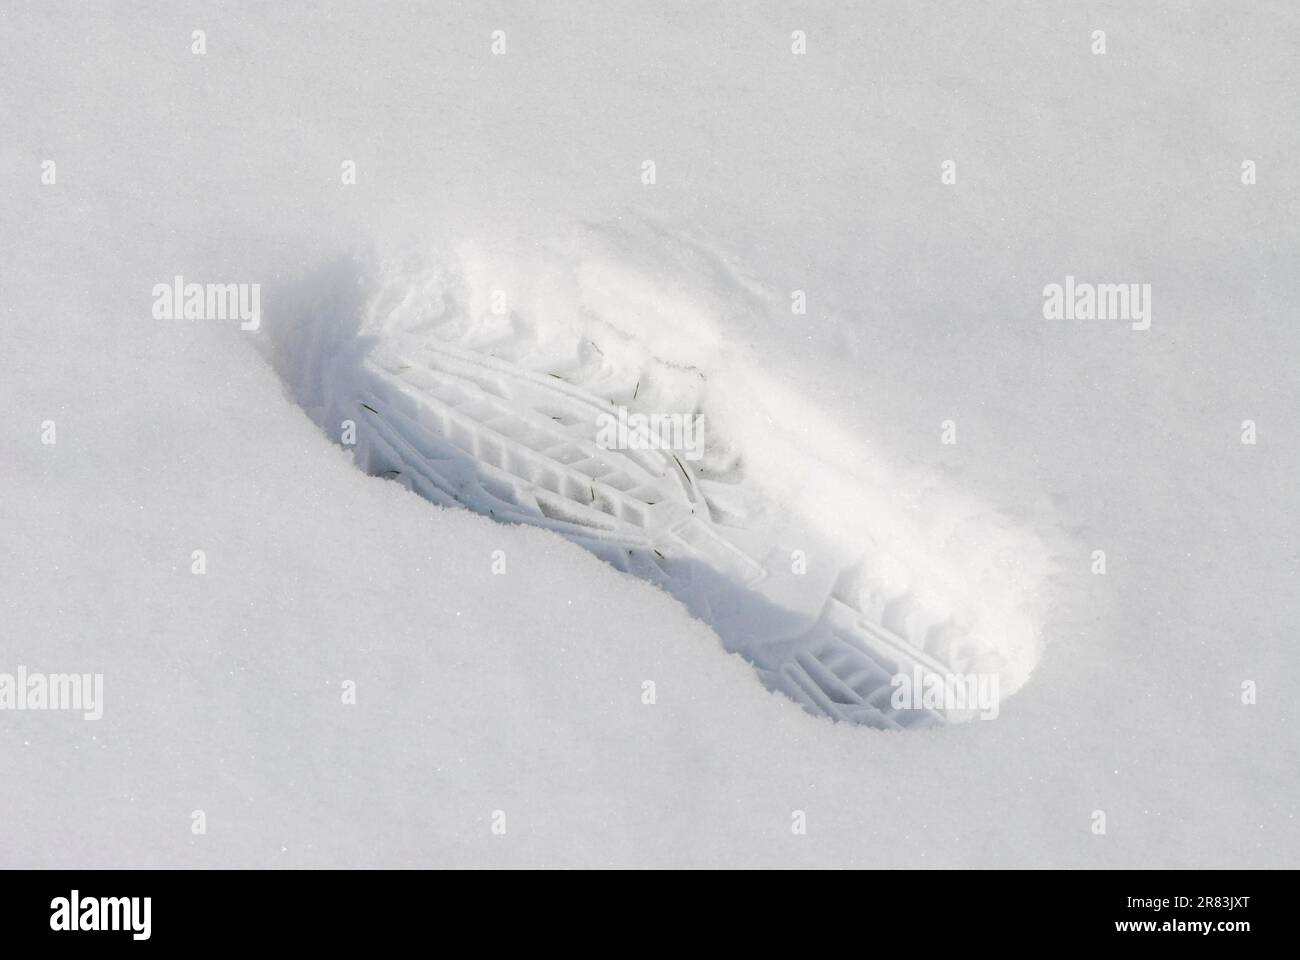 Footprint of a boot in the snow Stock Photo